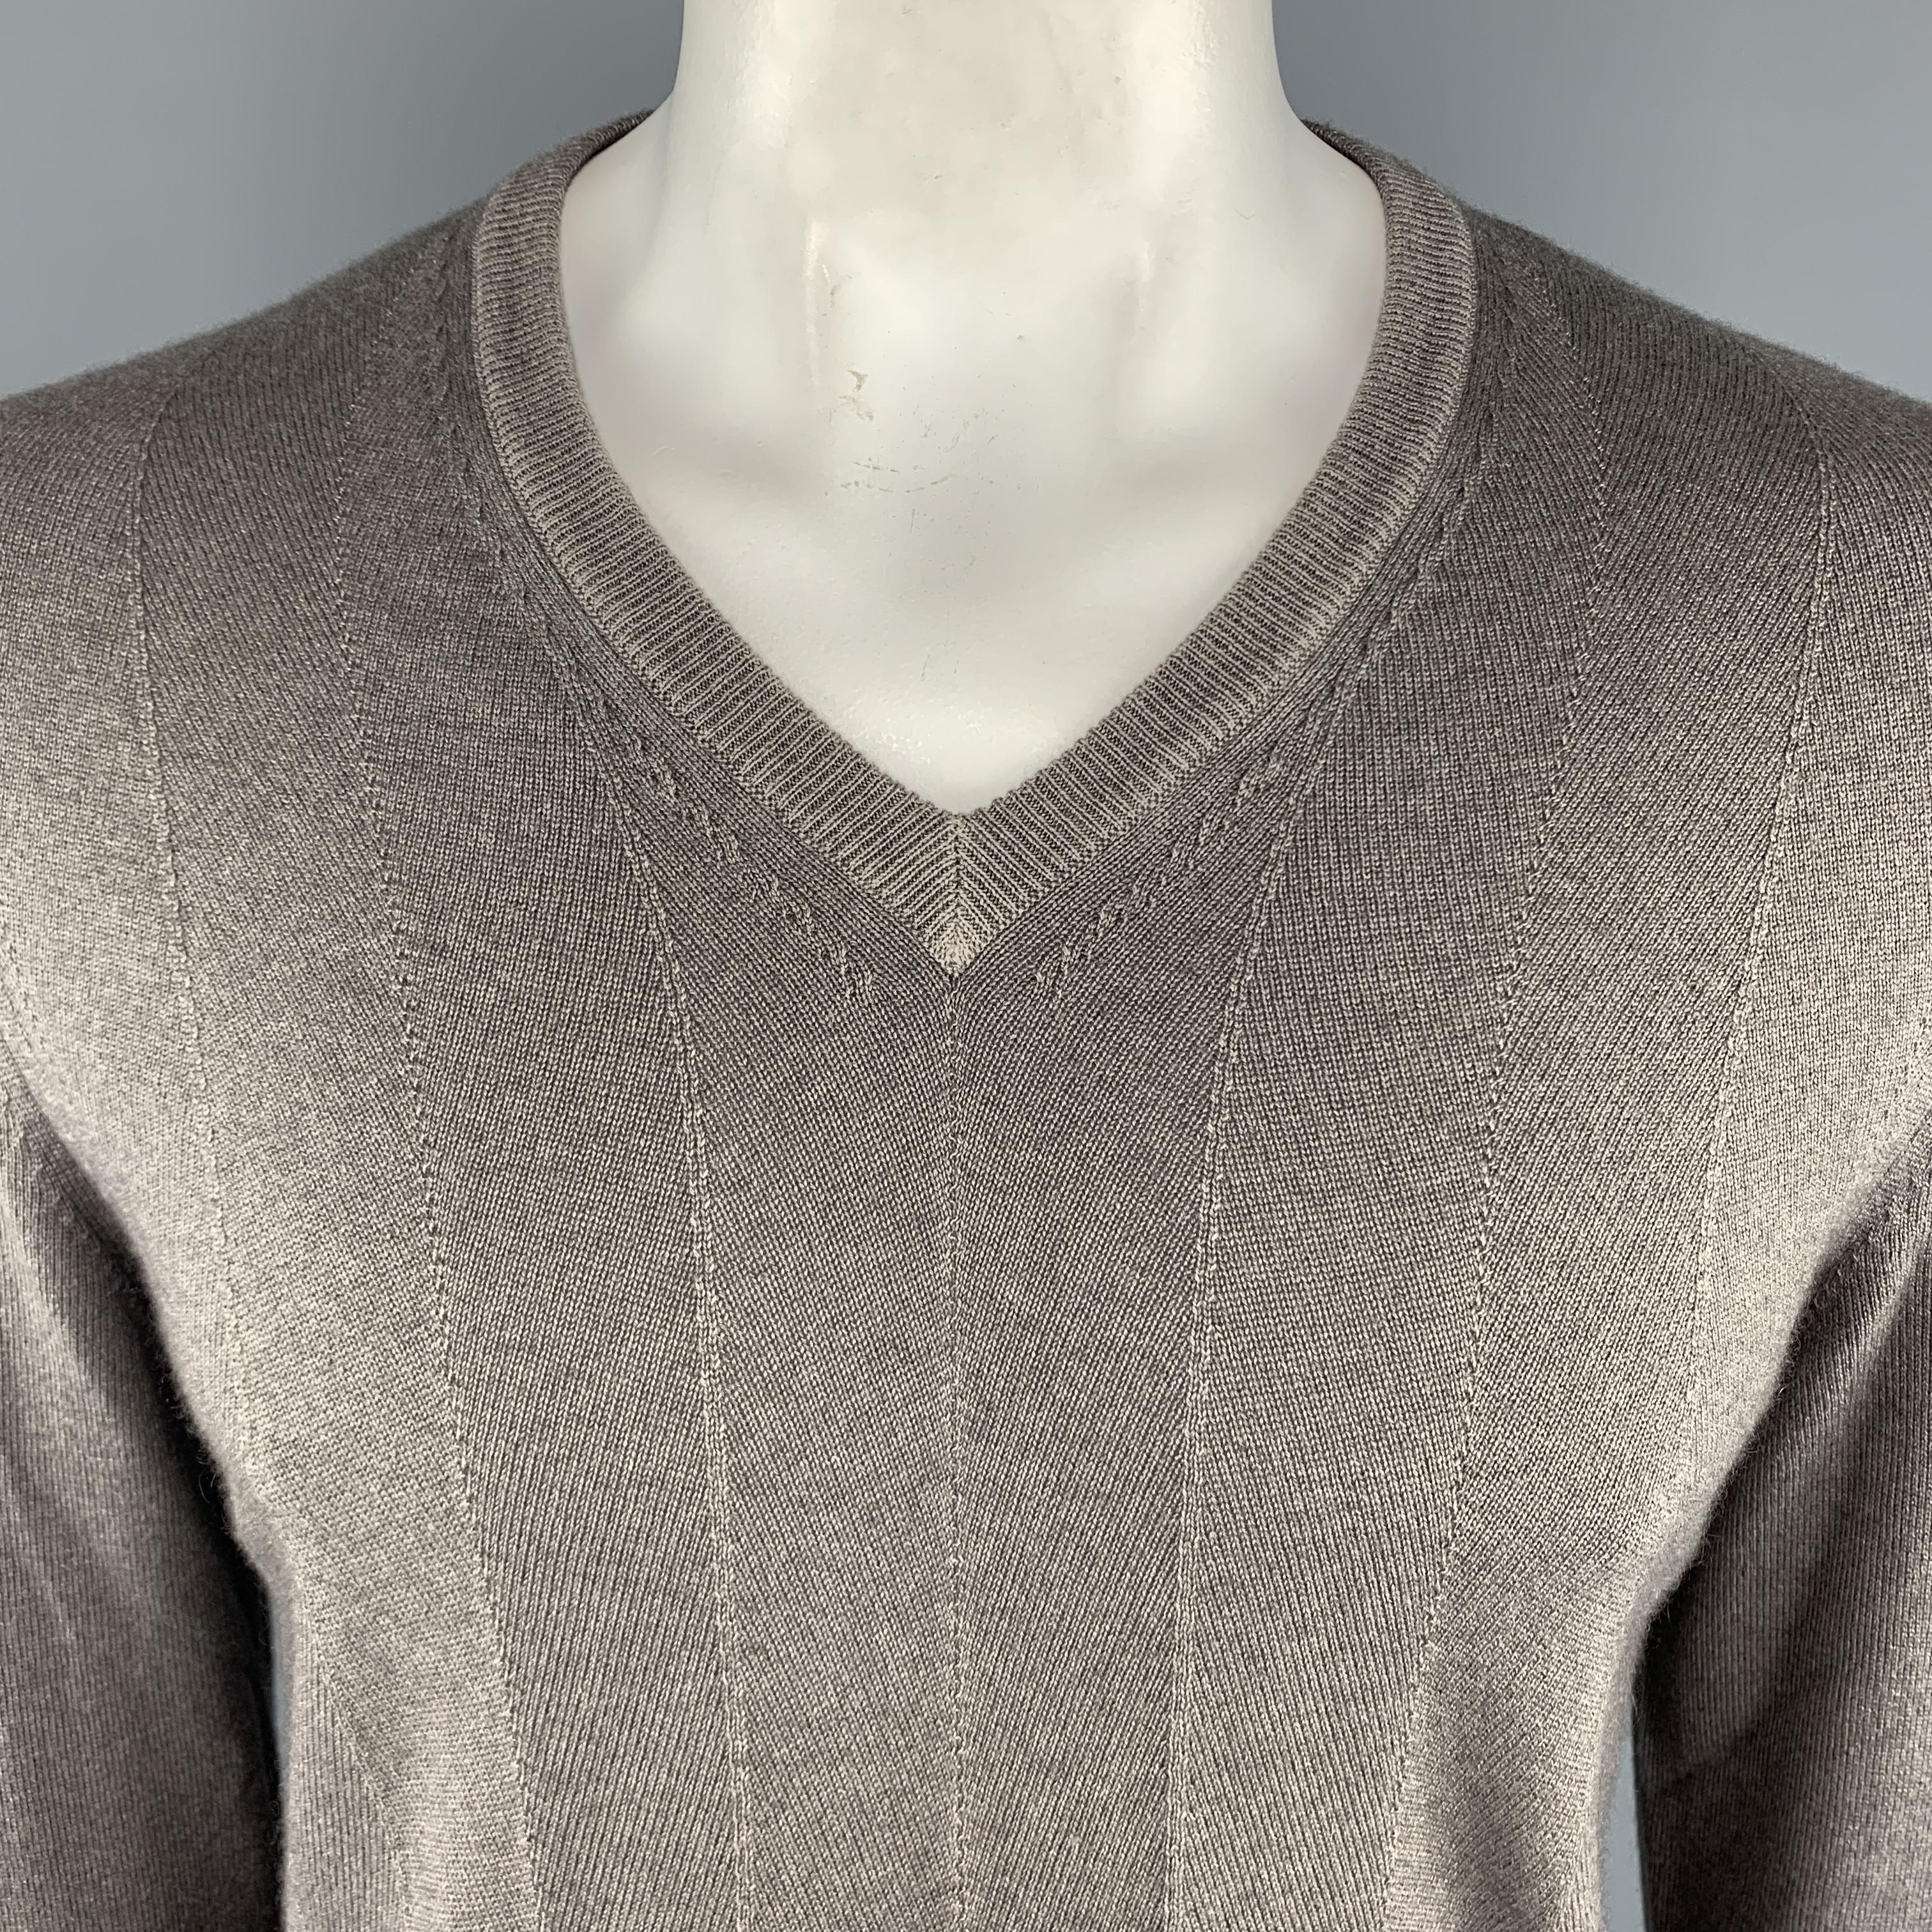 ERMENEGILDO ZEGNA Pullover Sweater comes in a taupe tone in a solid cashmere / silk material, with a V-neck, striped knitted details at front, long sleeves and ribbed cuffs and hem. Made in Italy.
 
Excellent Pre-Owned Condition.
Marked: L
